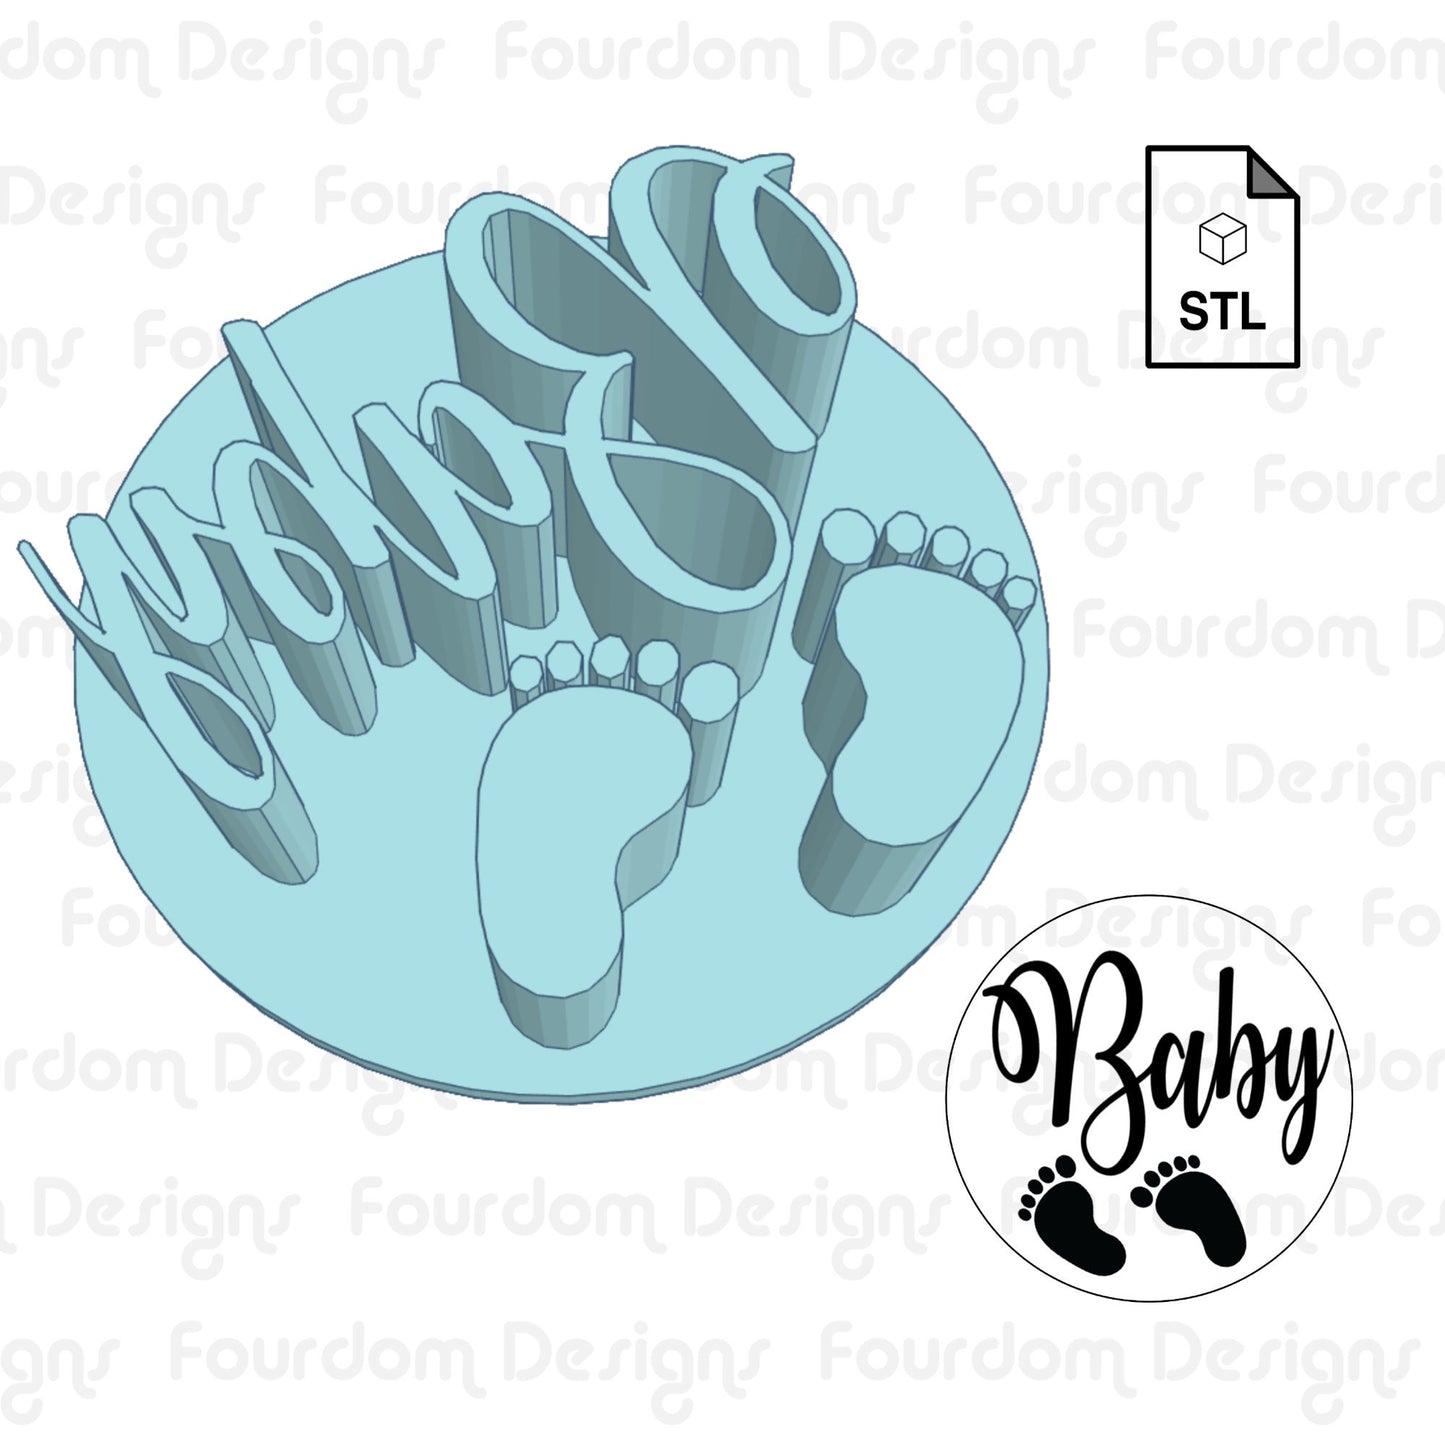 Baby Imprint Digital Download STL File for Cookie Cutter Fondant Cutter Clay Cutter 3D Model for 3D Printing